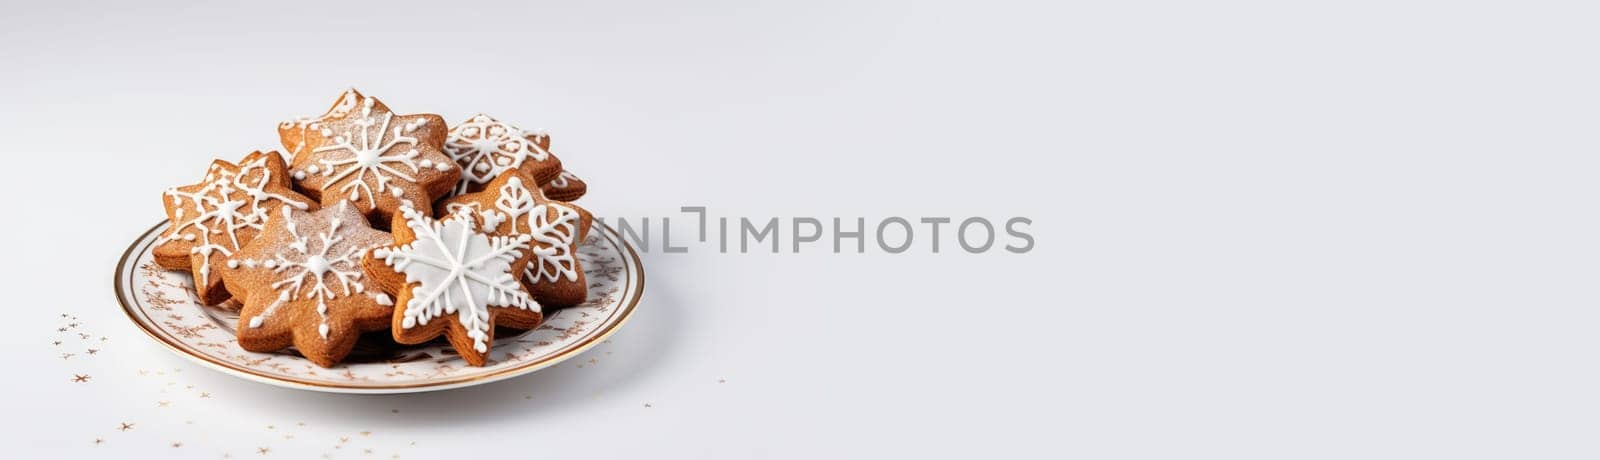 Homemade Christmas gingerbread cookies decorated with sweet sugar icing served on plate on white wooden background.